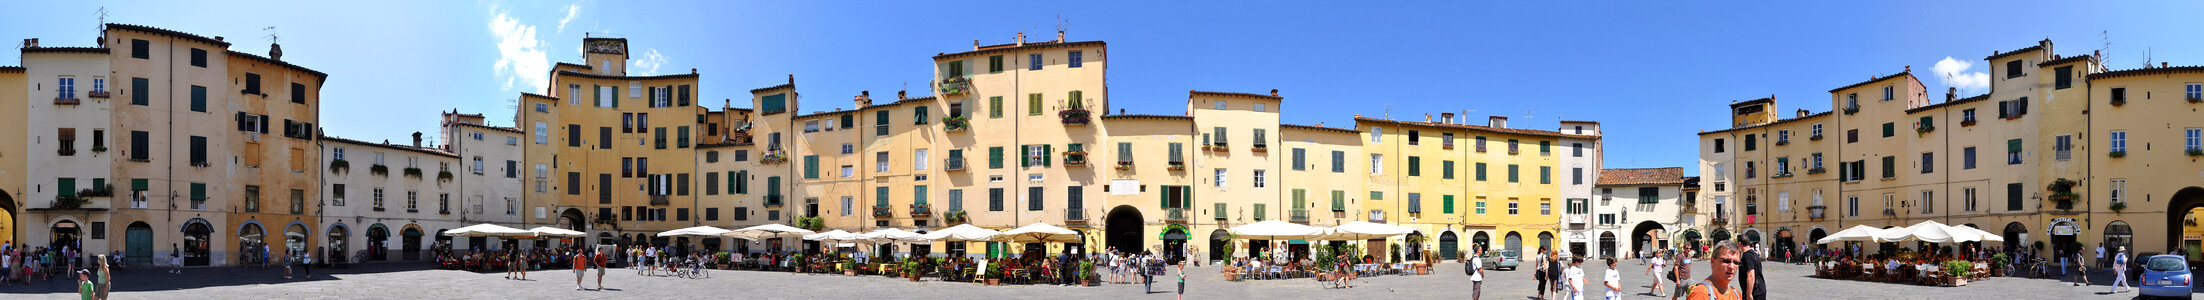 Piazza Anfiteatro in Lucca, Italy